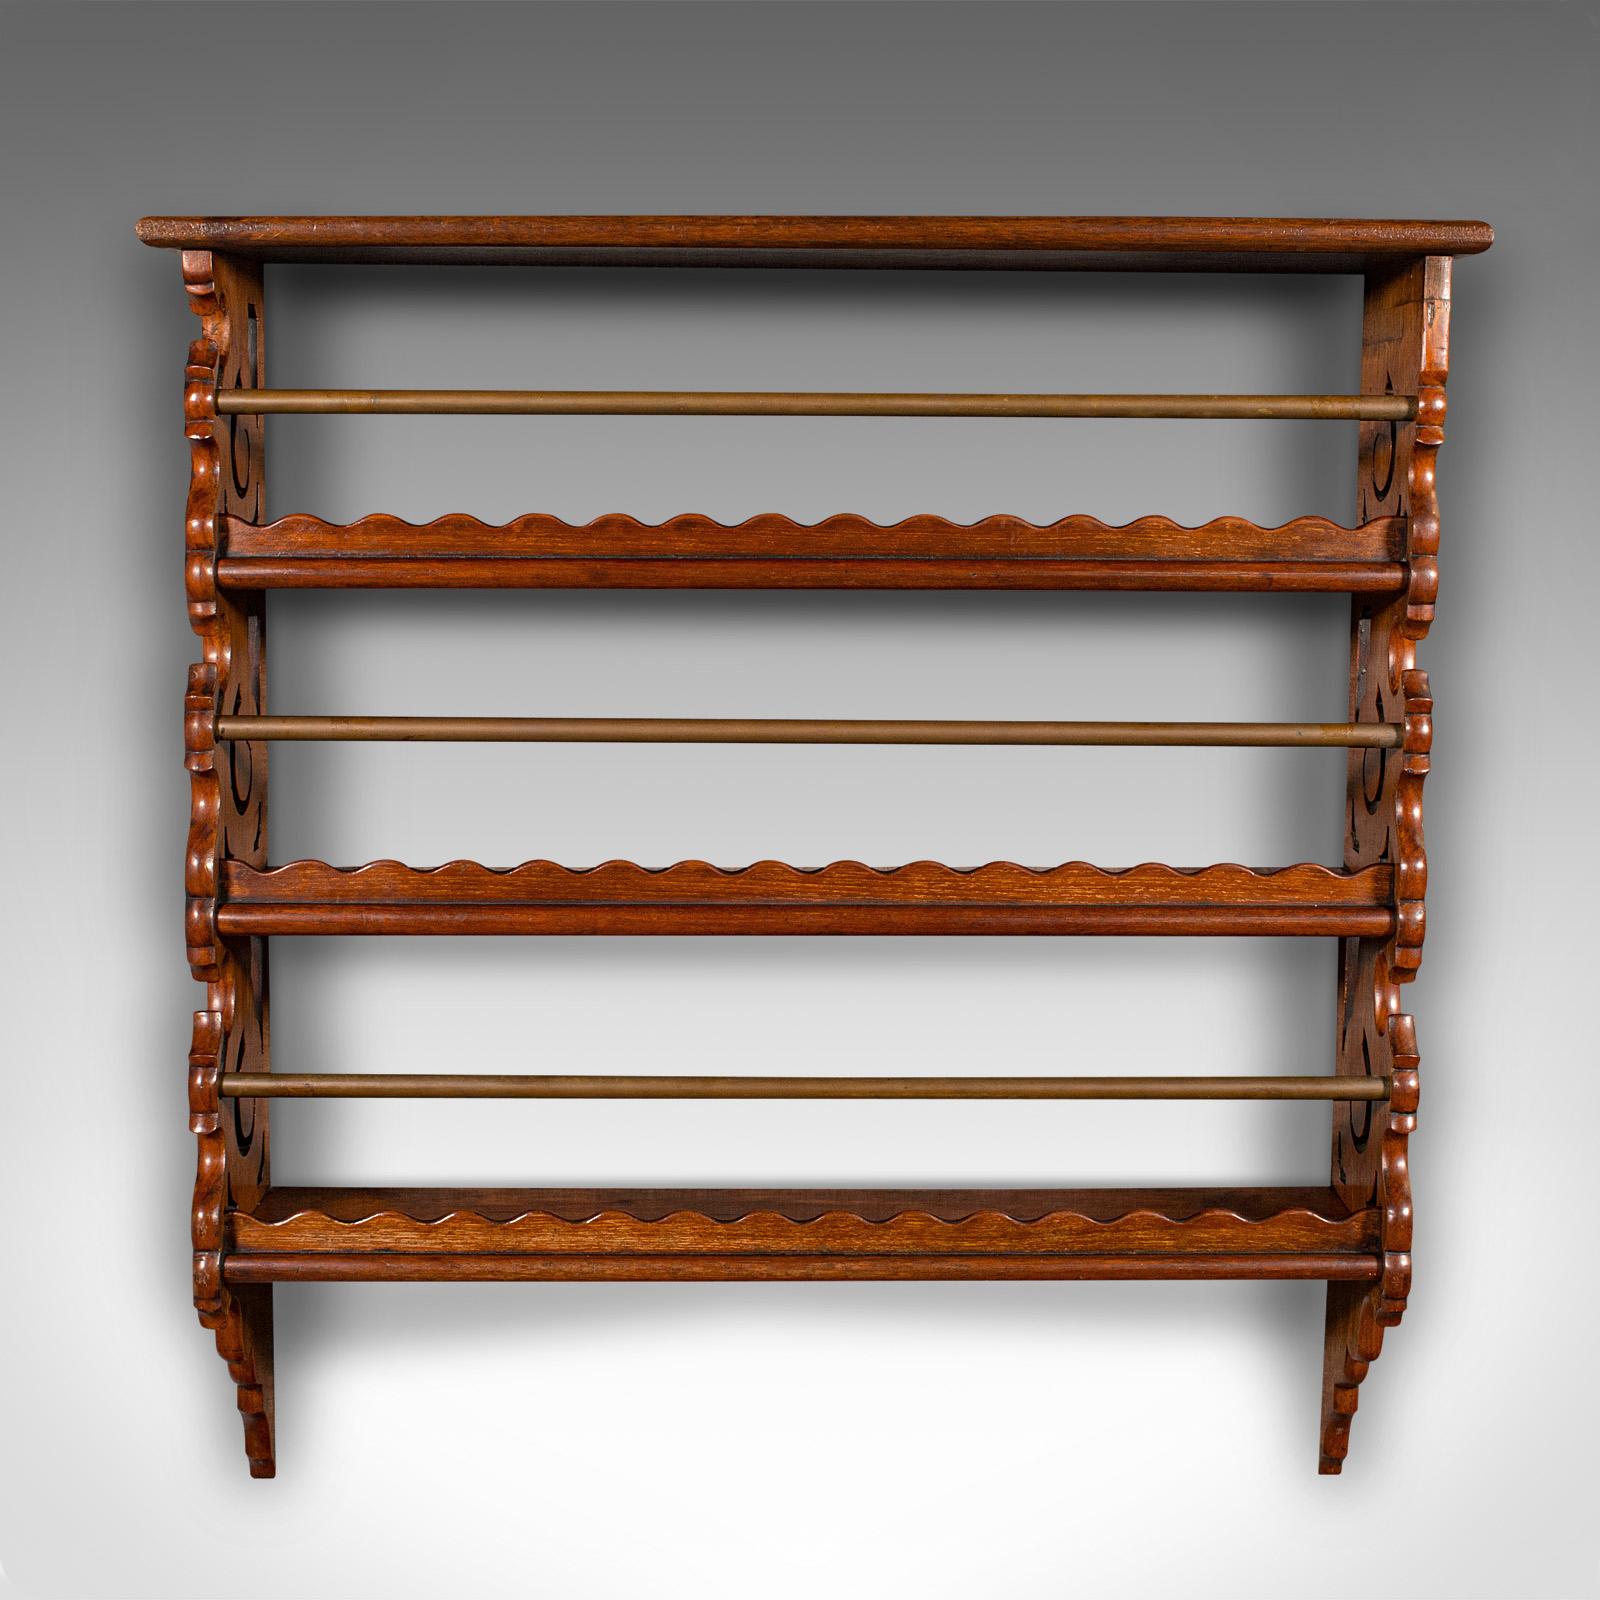 This is a set of antique ship's gallery shelves. An English, mahogany and brass maritime or kitchen rack with safety bars, dating to the Edwardian period, circa 1910.

Attractive shelf unit with carved and pierced detail
Displaying a desirable